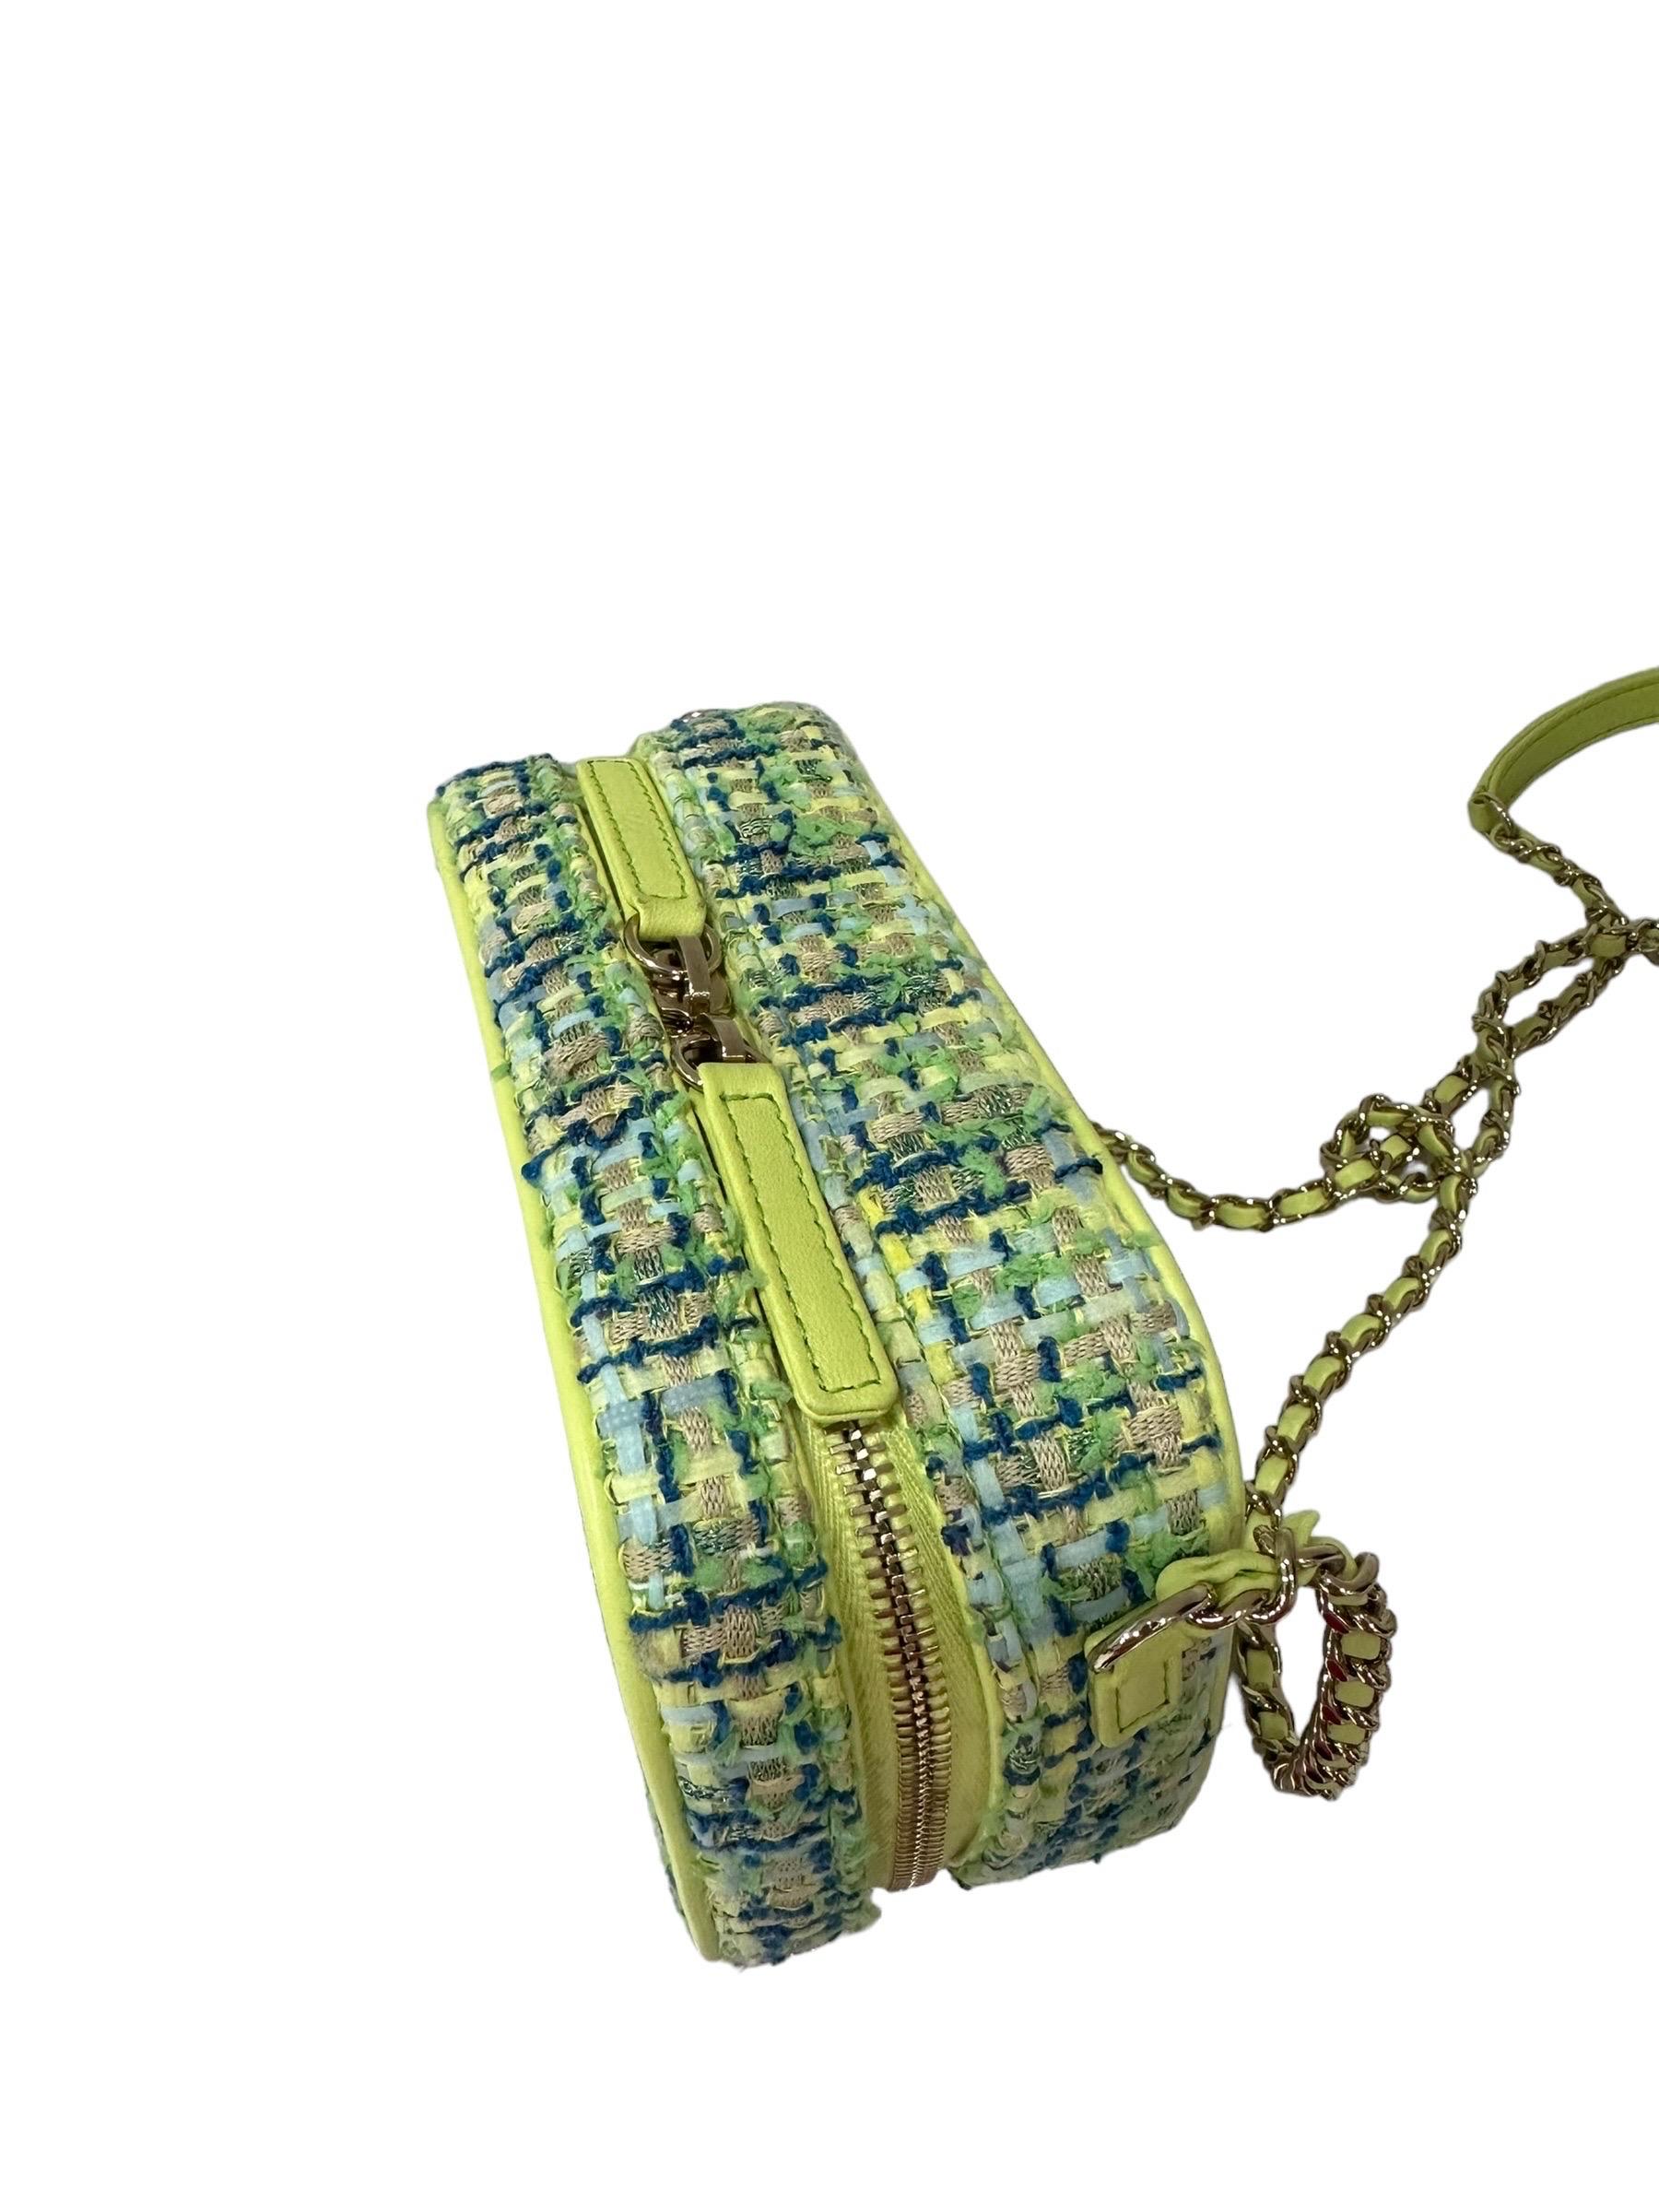 Borsa A Tracolla Chanel Camera Bag Tweed Lime 2019 For Sale 2